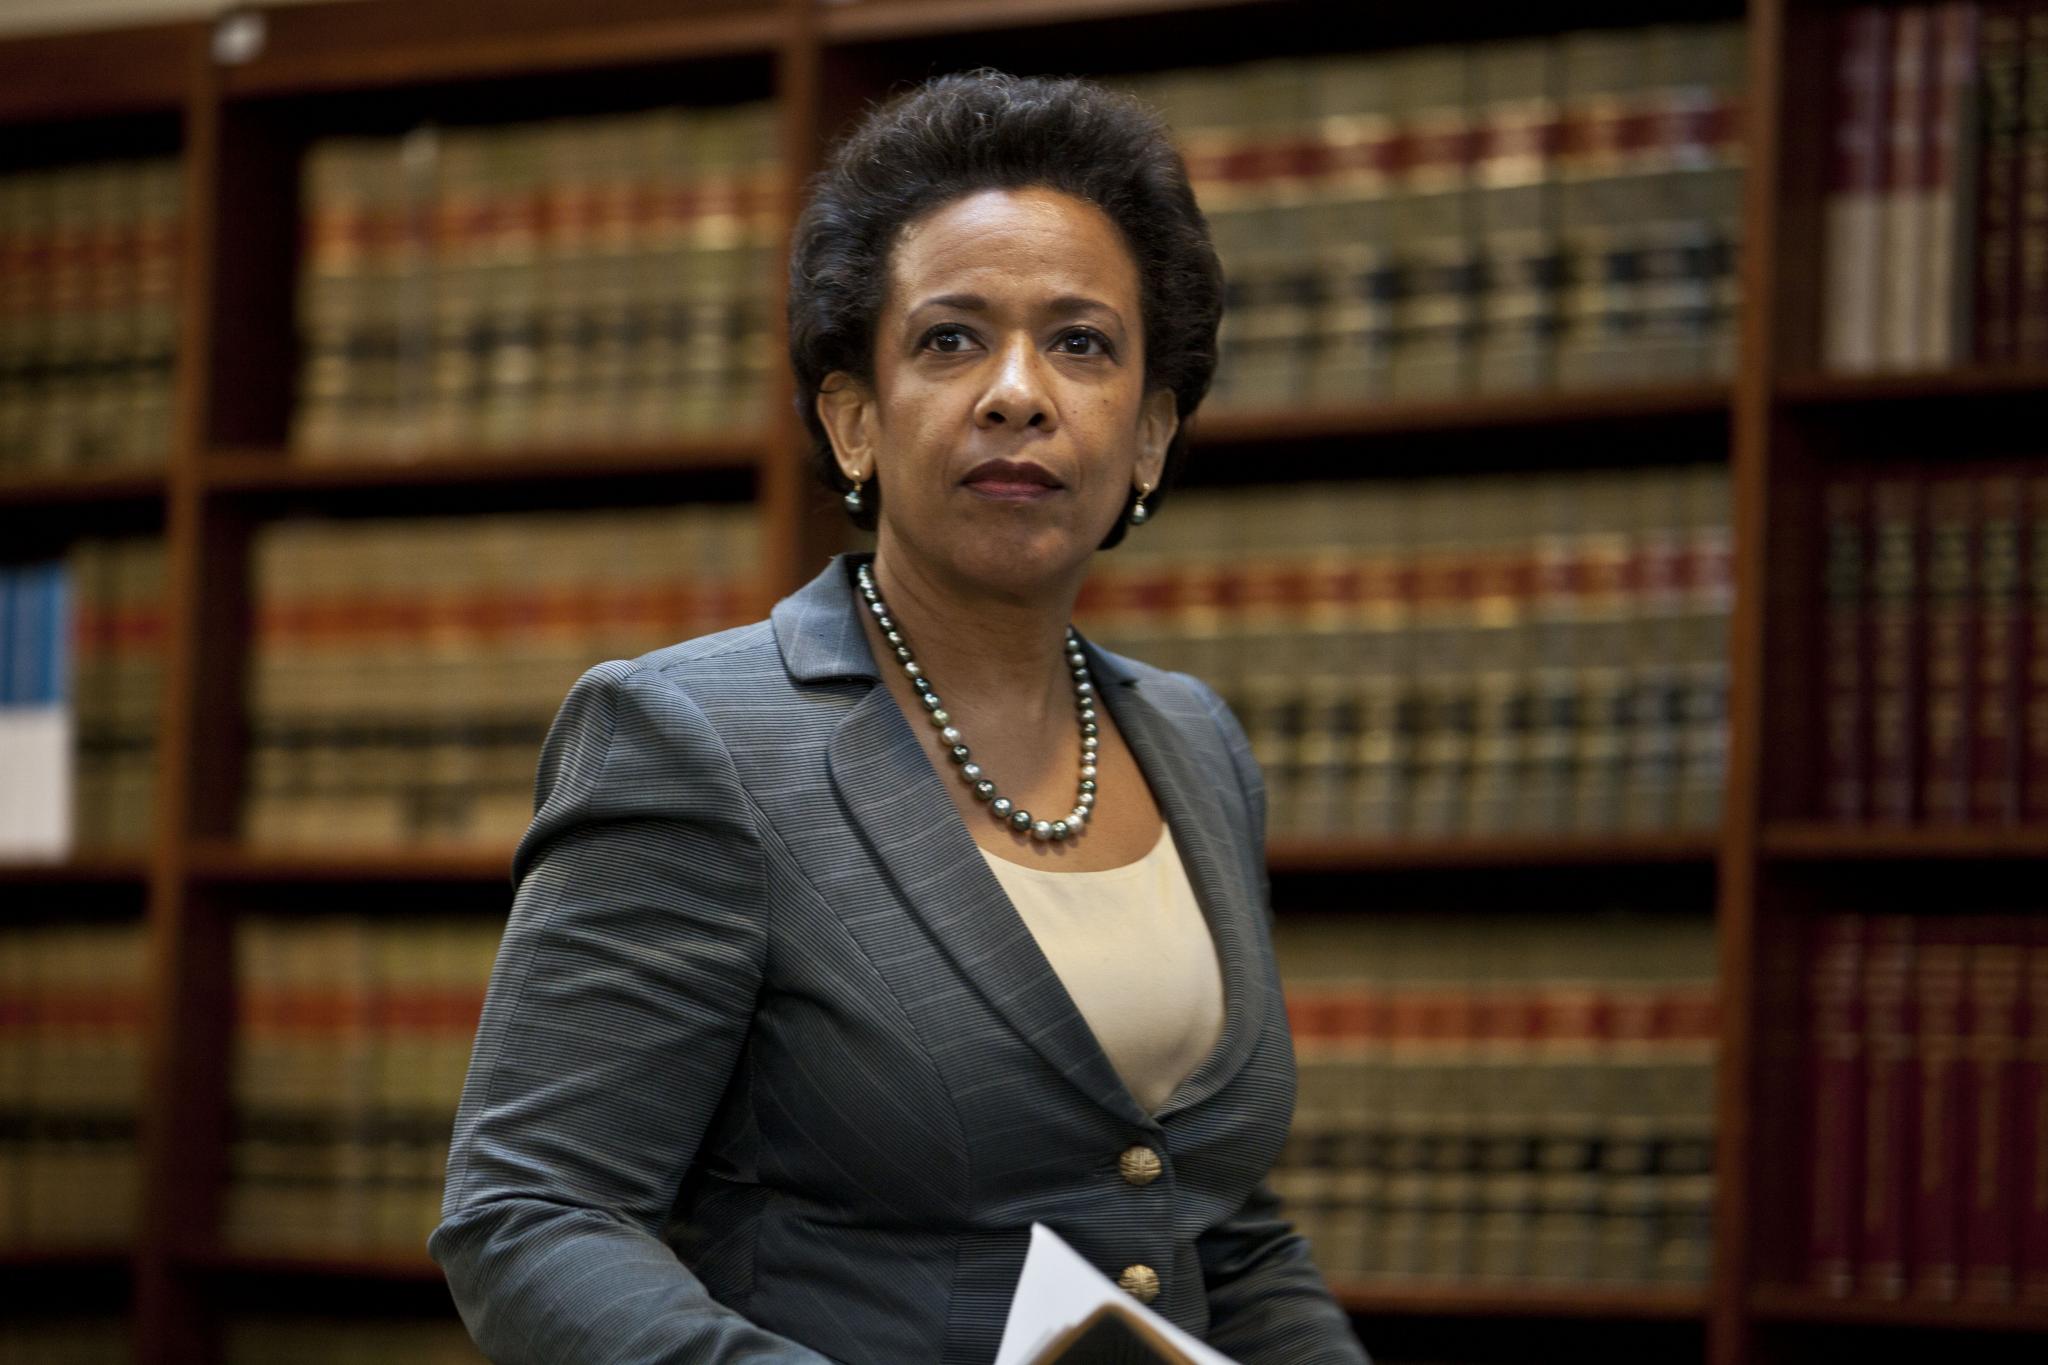 Black Leaders, Clergy March to Push for Loretta Lynch Confirmation